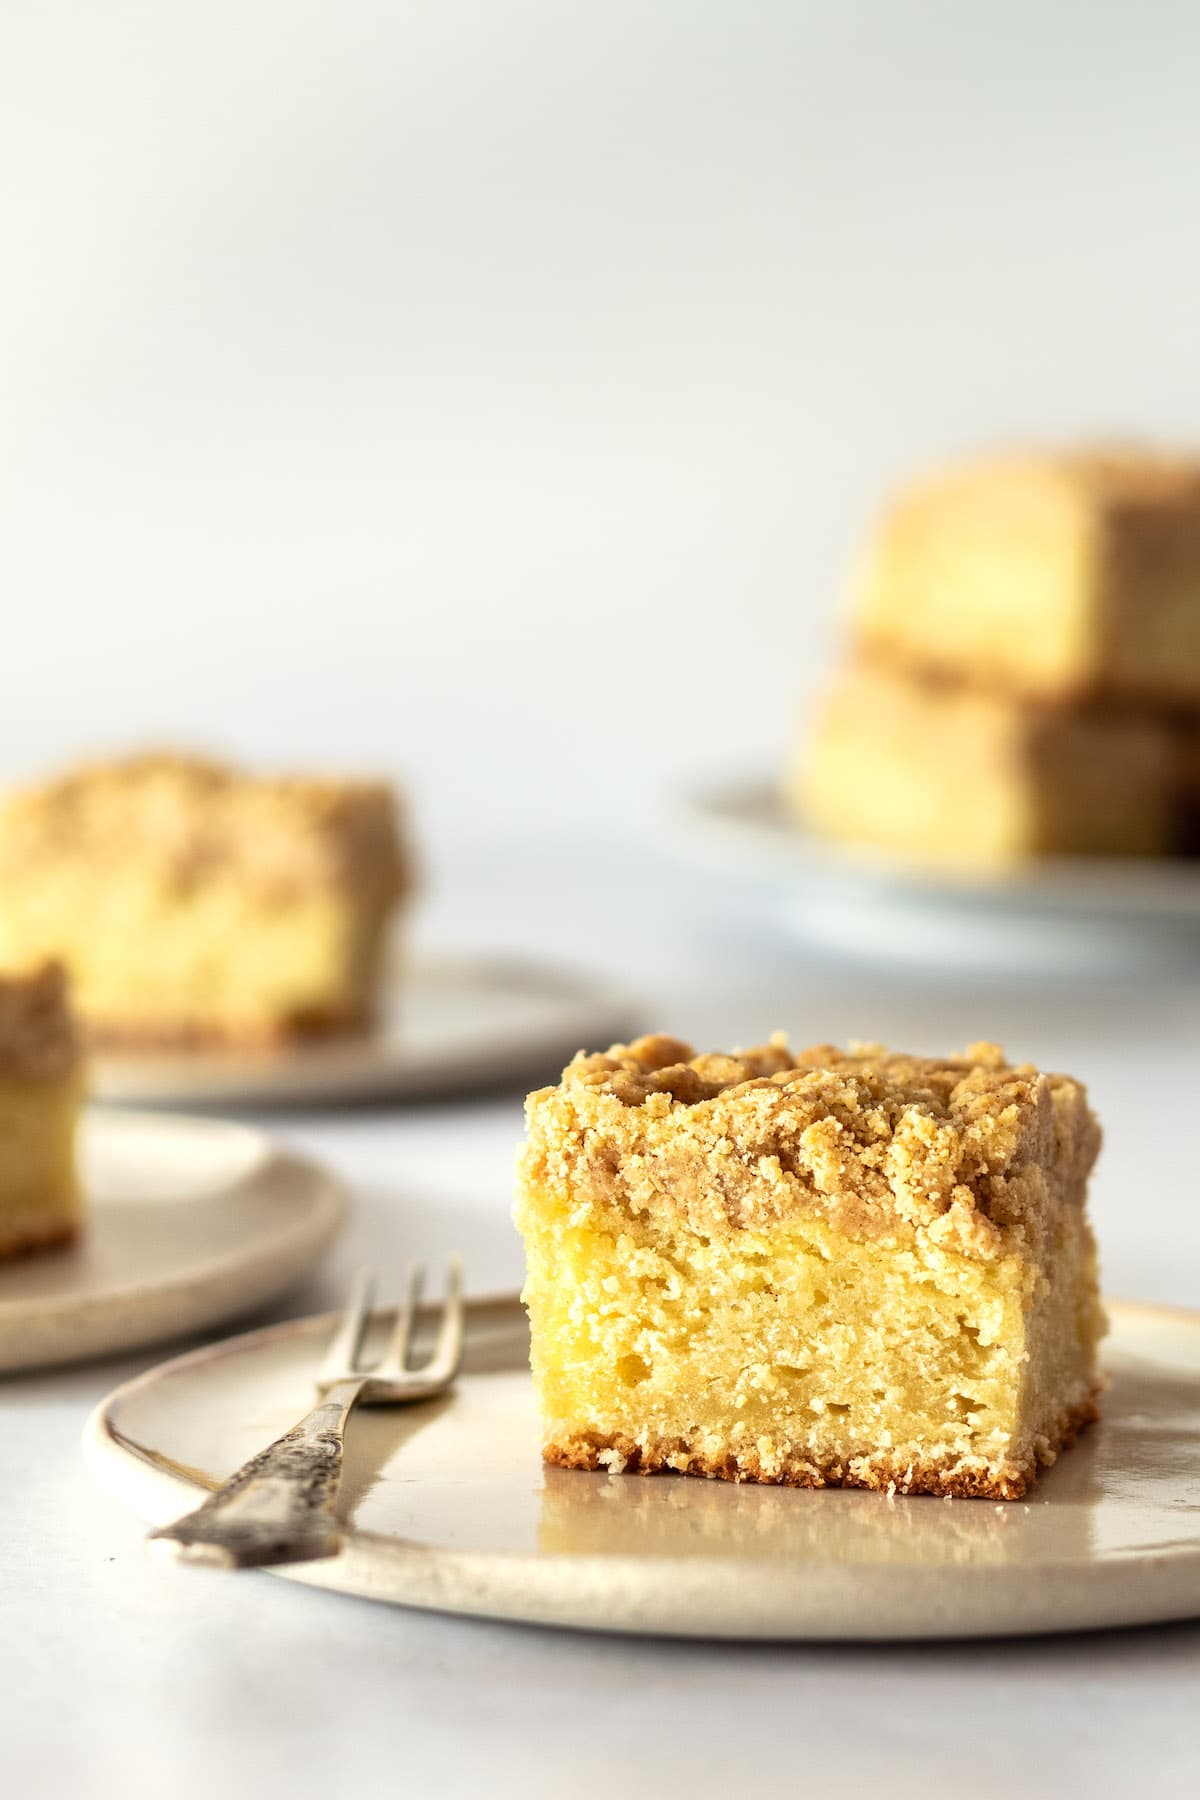 Side view of crumb cake on plate with fork